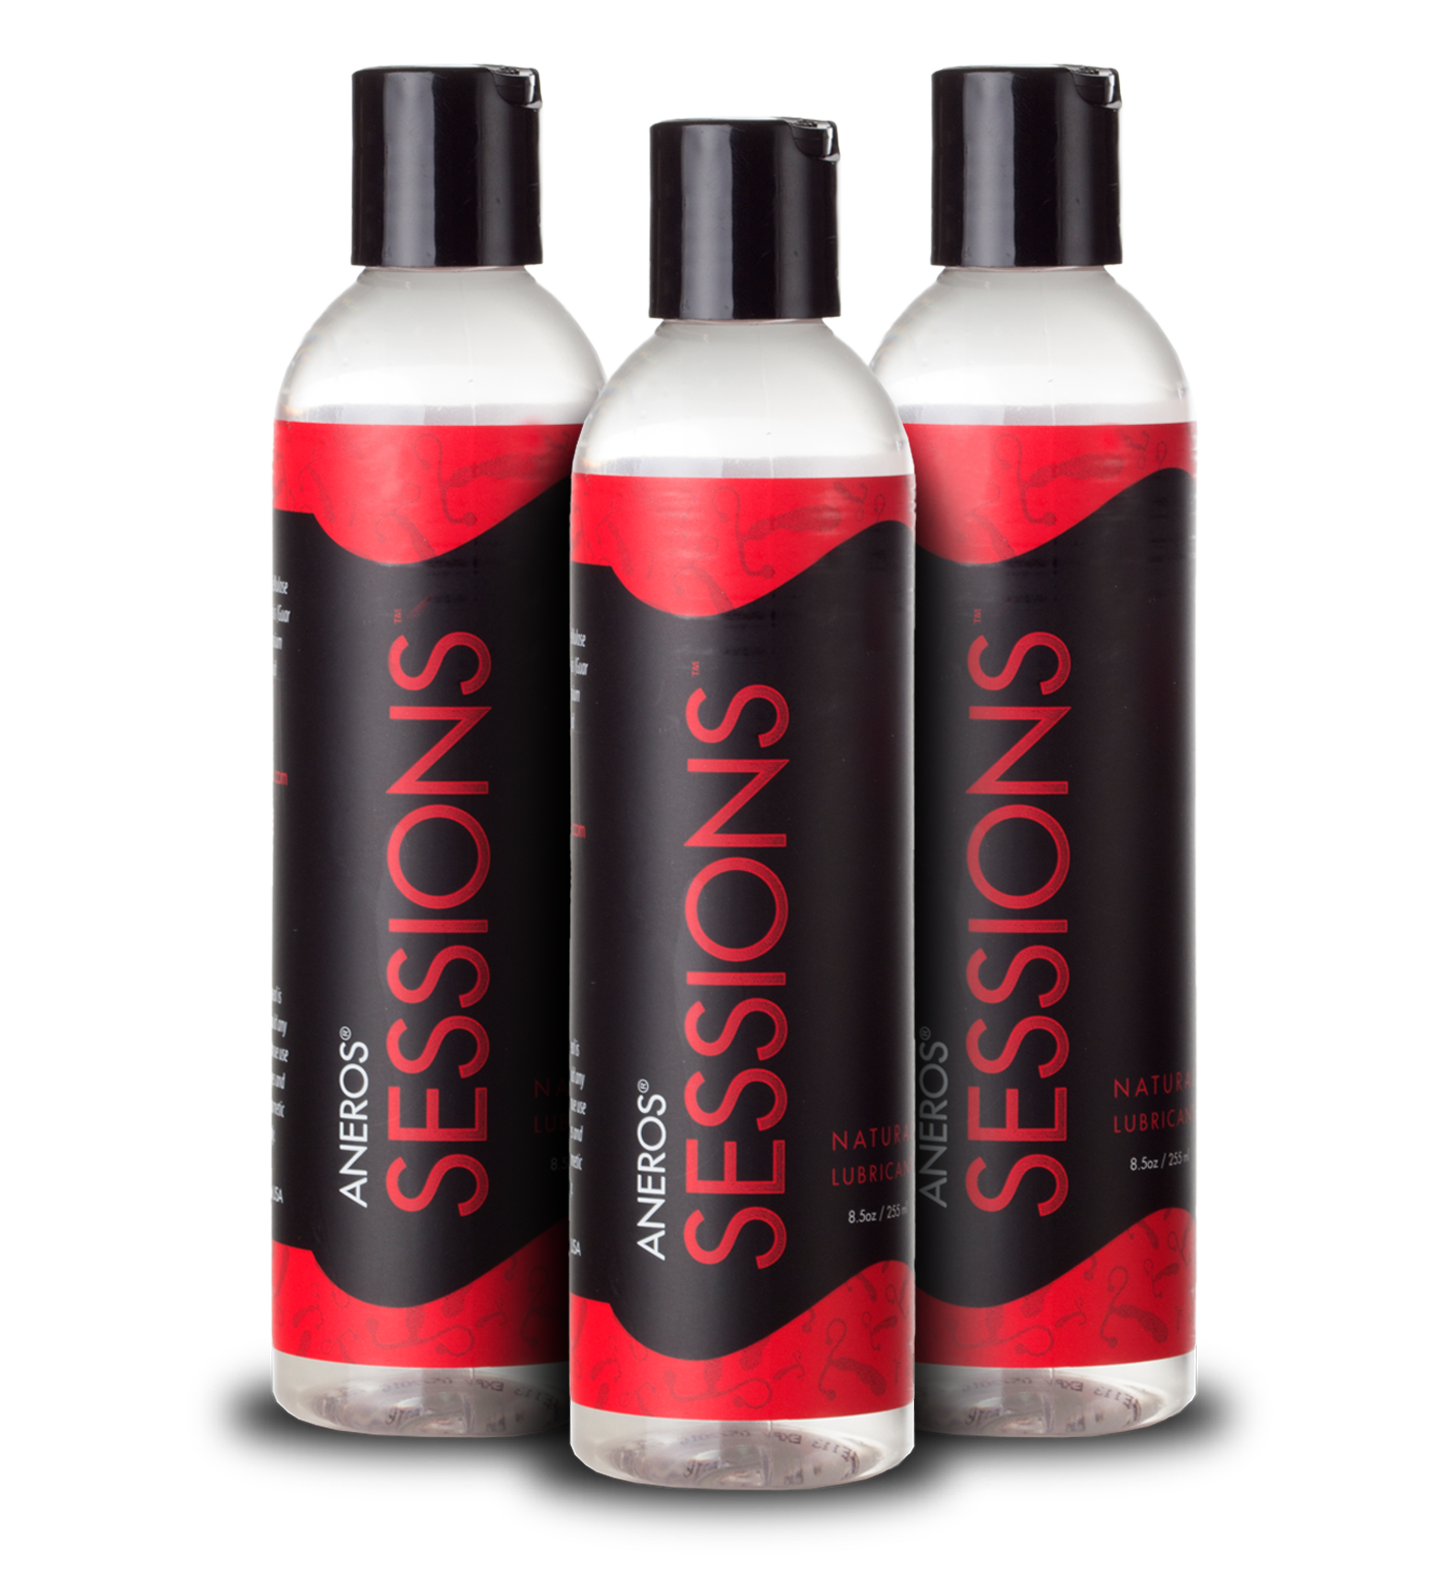 Sessions Lube For a Year Product Image